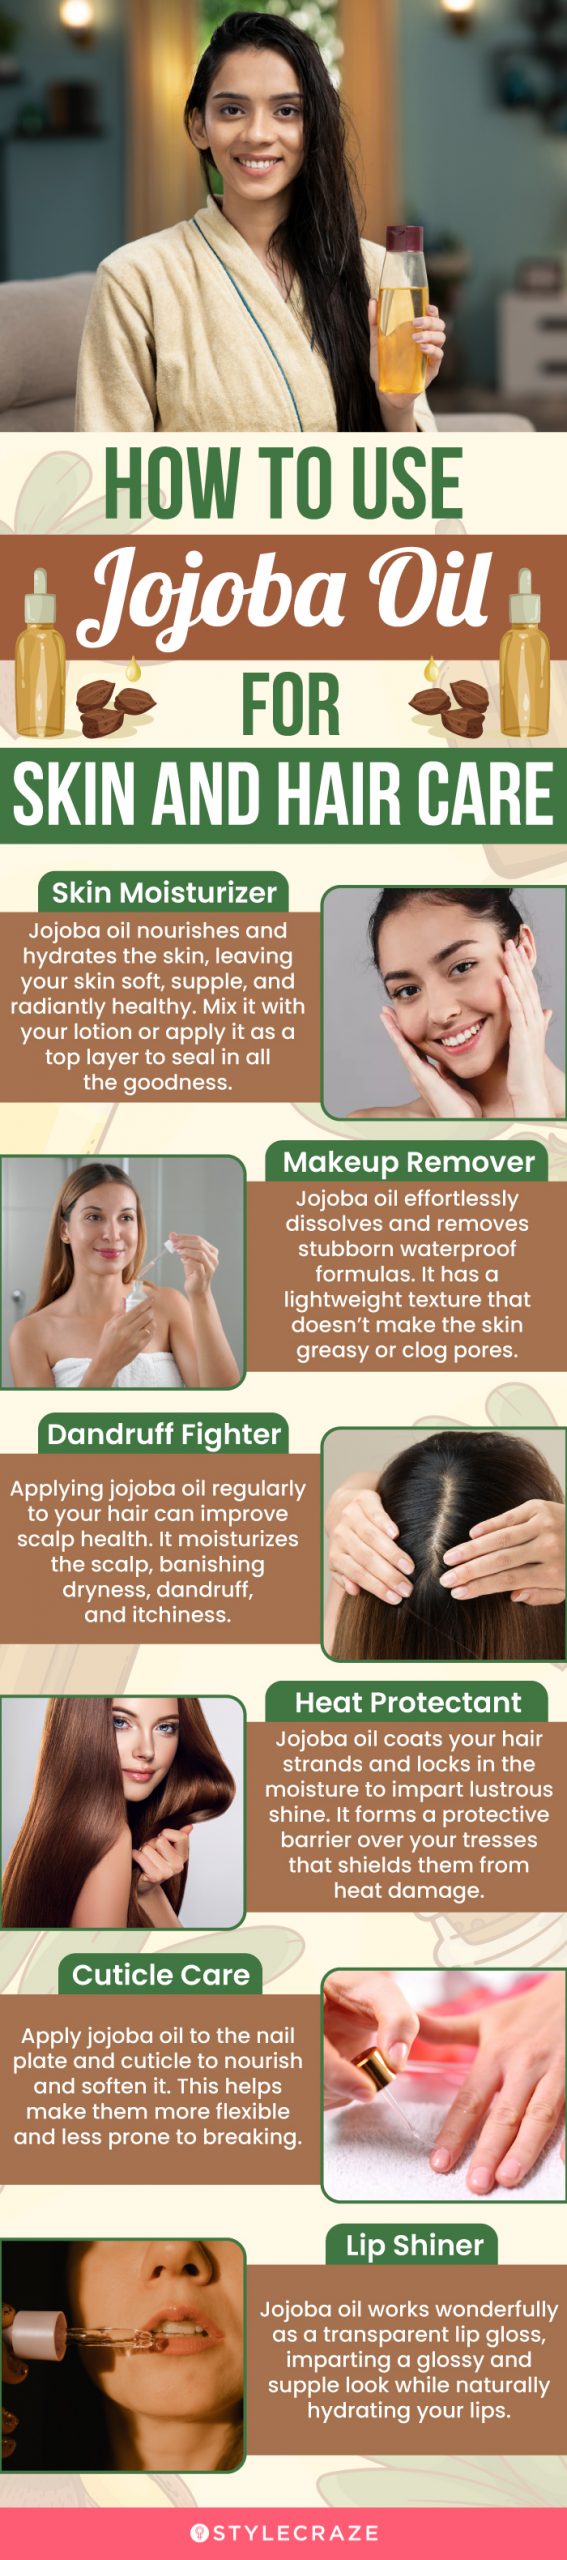 How To Use Jojoba Oil For Skin And Hair Care (infographic)